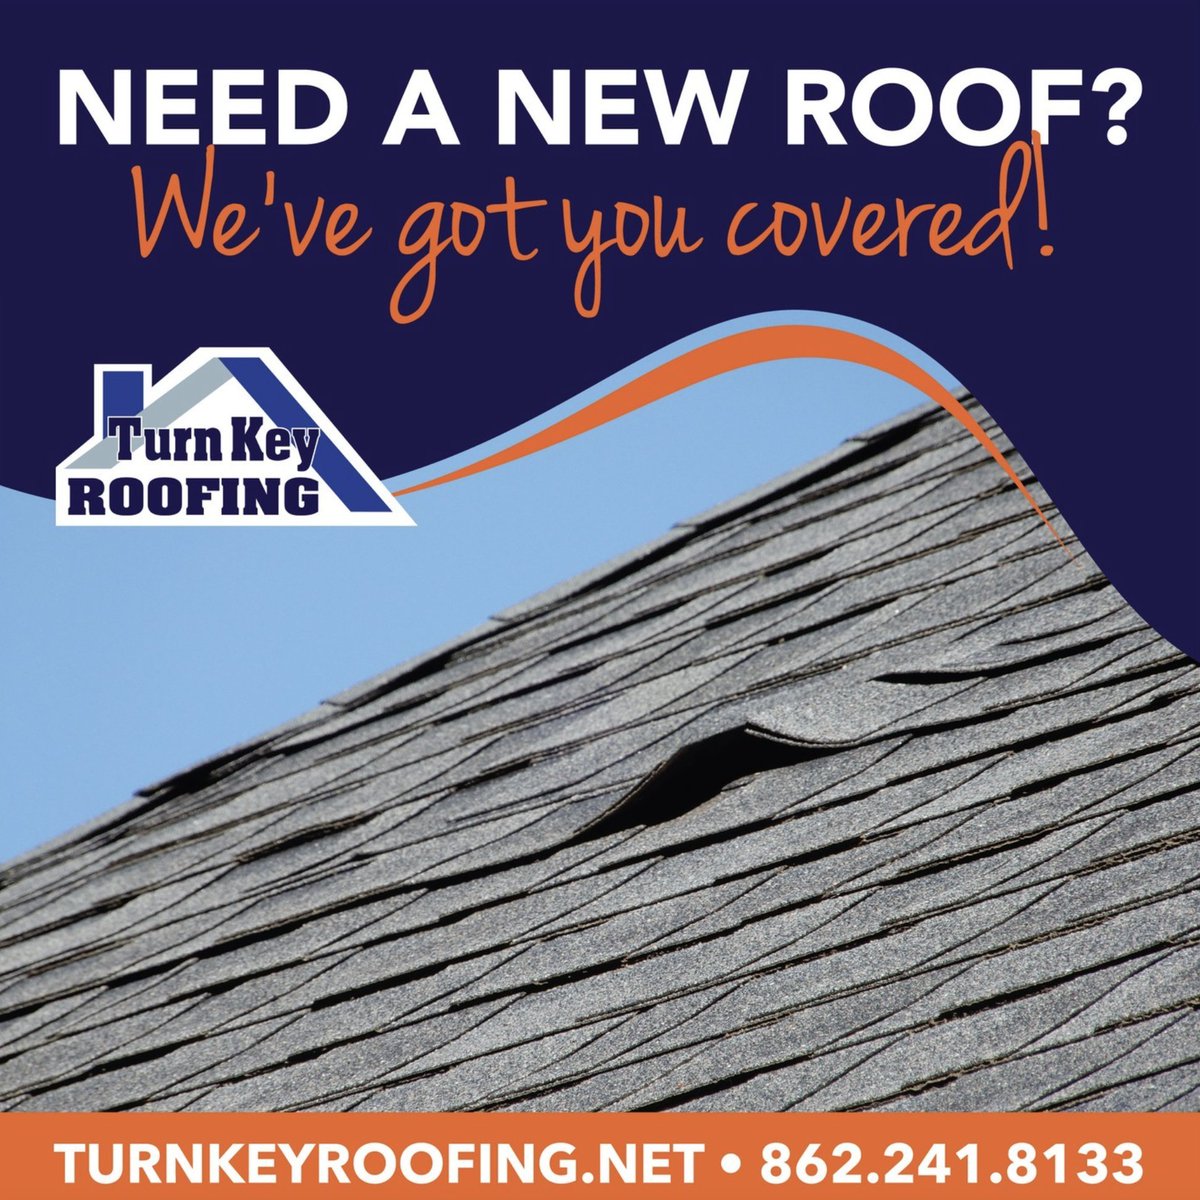 Need a new roof? We’ve got you covered!

TurnKeyRoofing.net 

#RoofingContractor #Roofing #NewRoof #Andersonismytown #YeahthatGreenville #TurnKeyRoofing #RoofInspection #Home